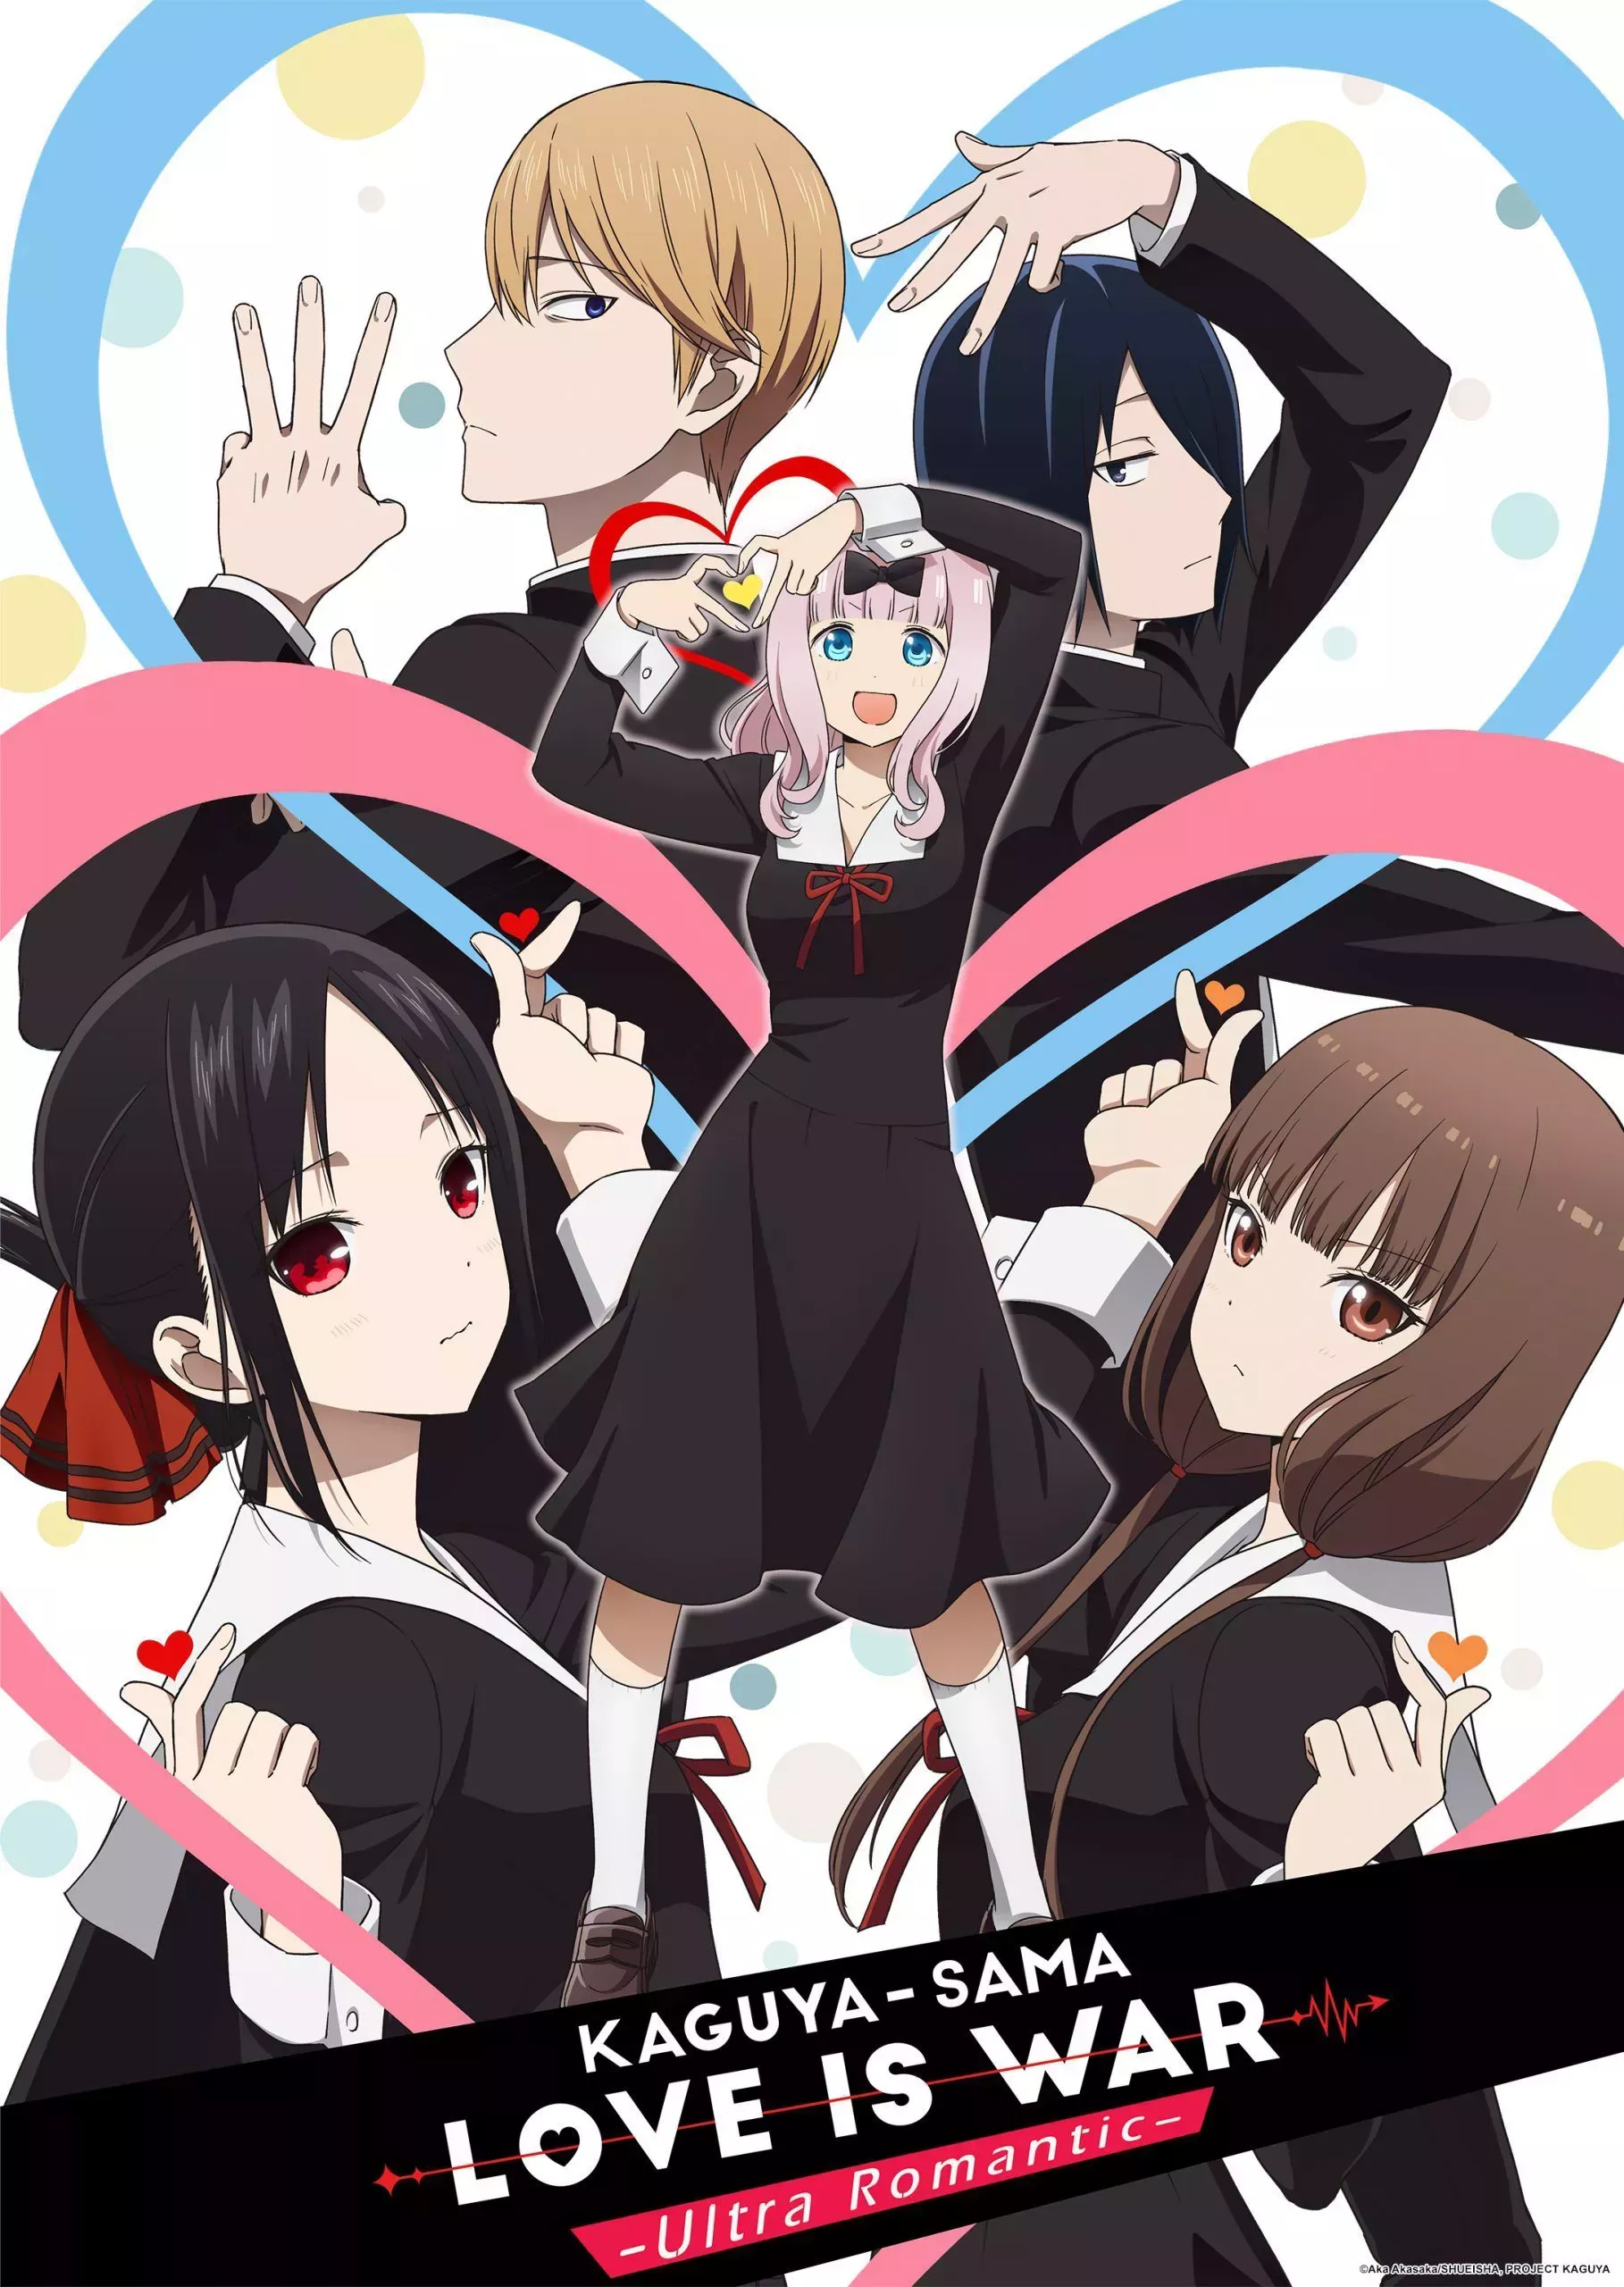 Kaguya-sama surrounded by posing cast of characters in Love Is War Anime Poster